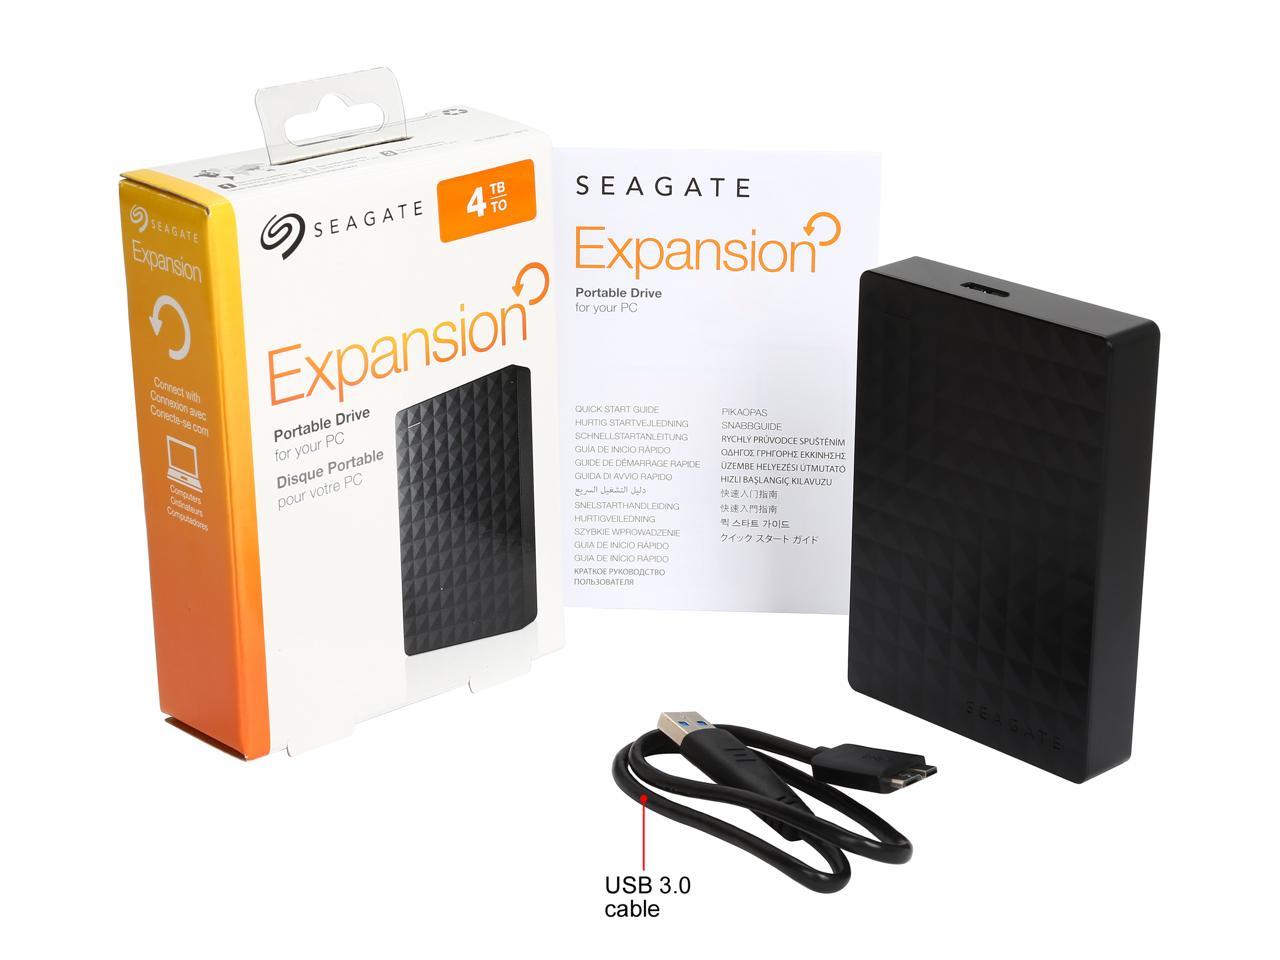 Seagate Portable Hard Drive 4Tb Hdd - External Expansion For Pc Windows Ps4 & Xbox - Usb 2.0 & 3.0 Black (Stea4000400)